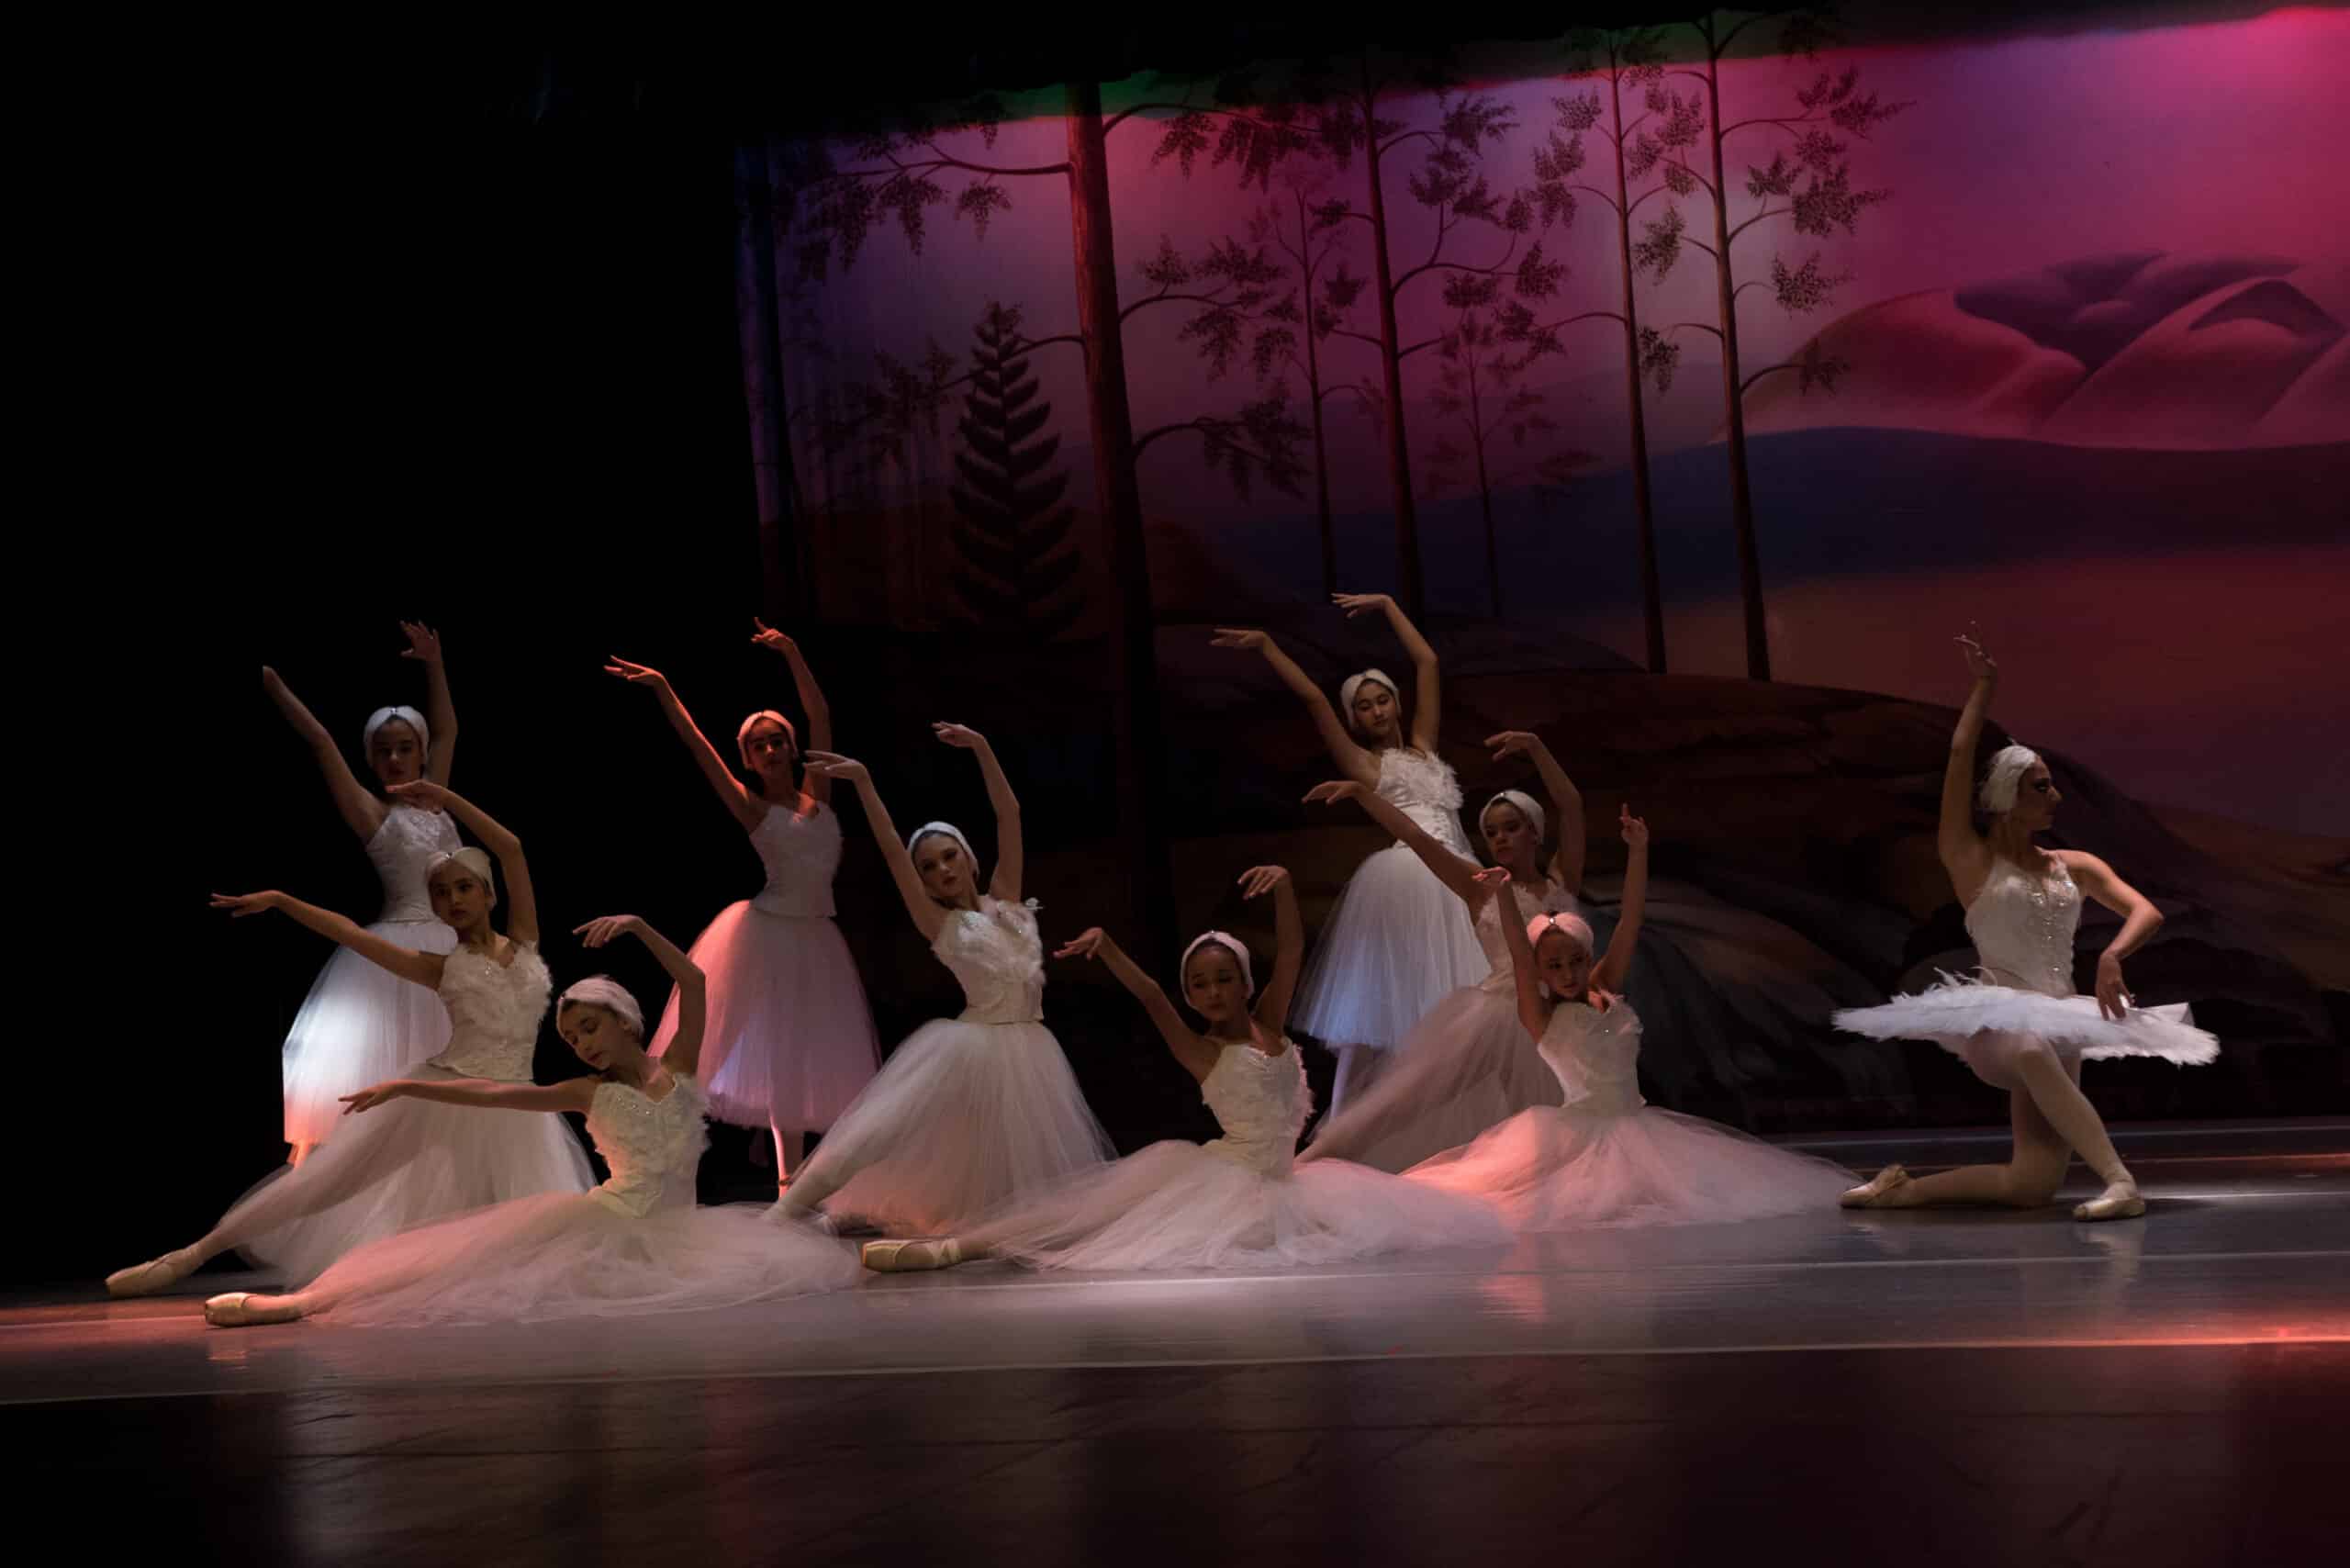 Paris Ballet ensemble on stage with arms up.